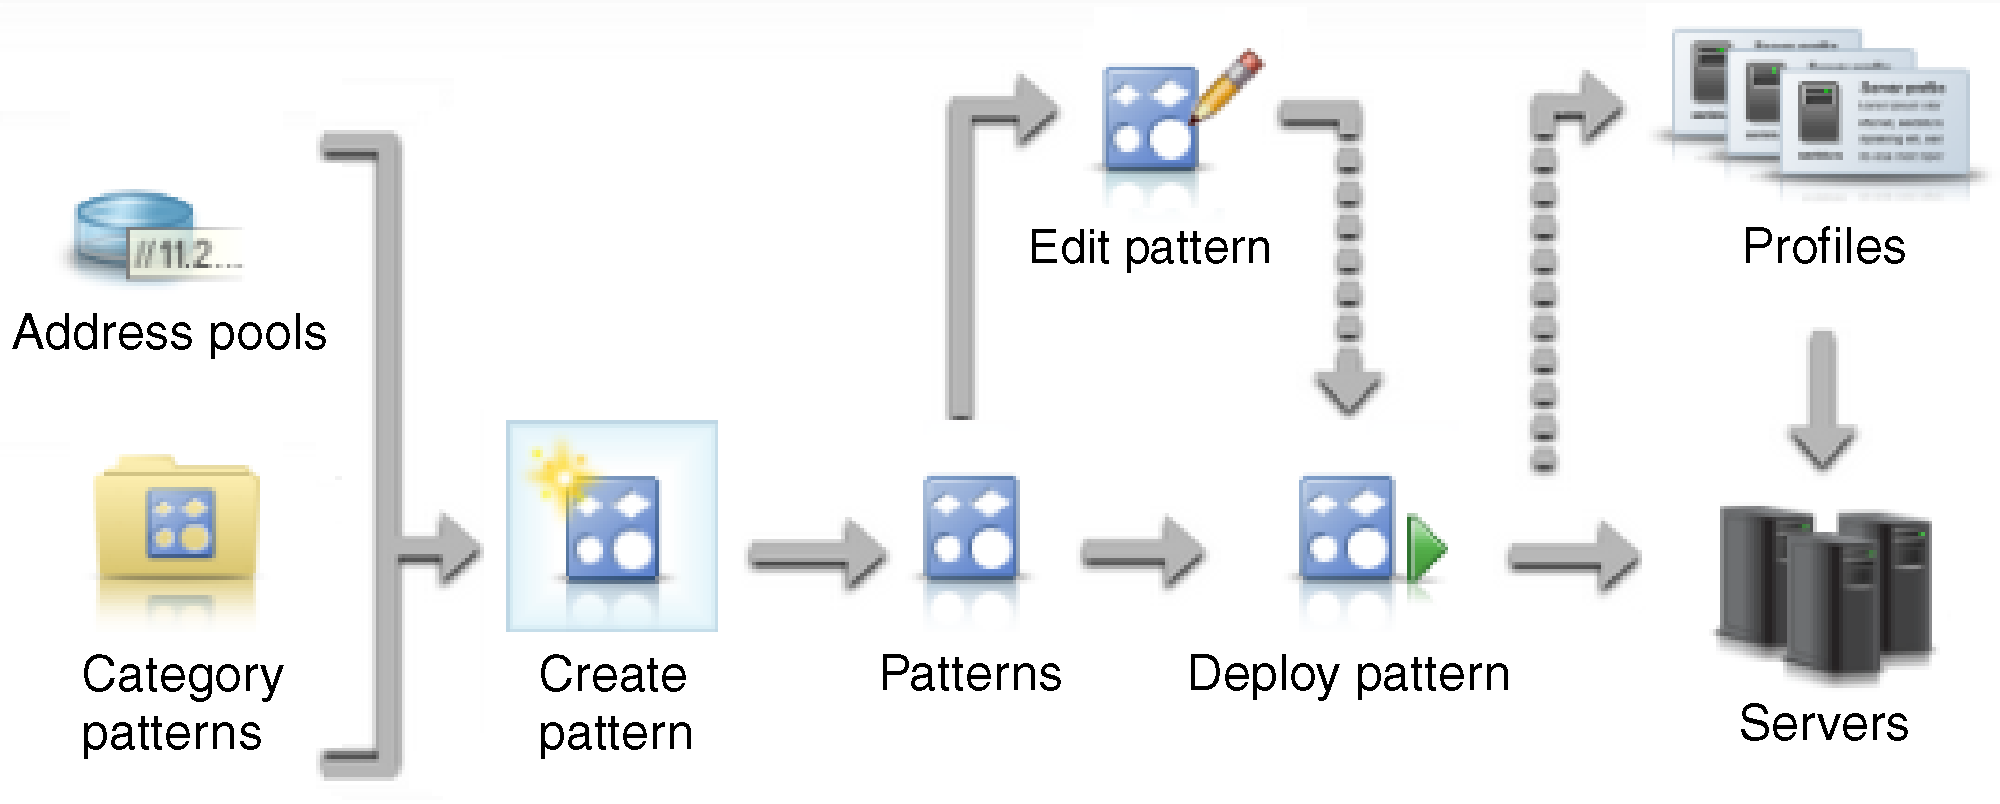 Illustrates the steps involved in creating and deploying server patterns.